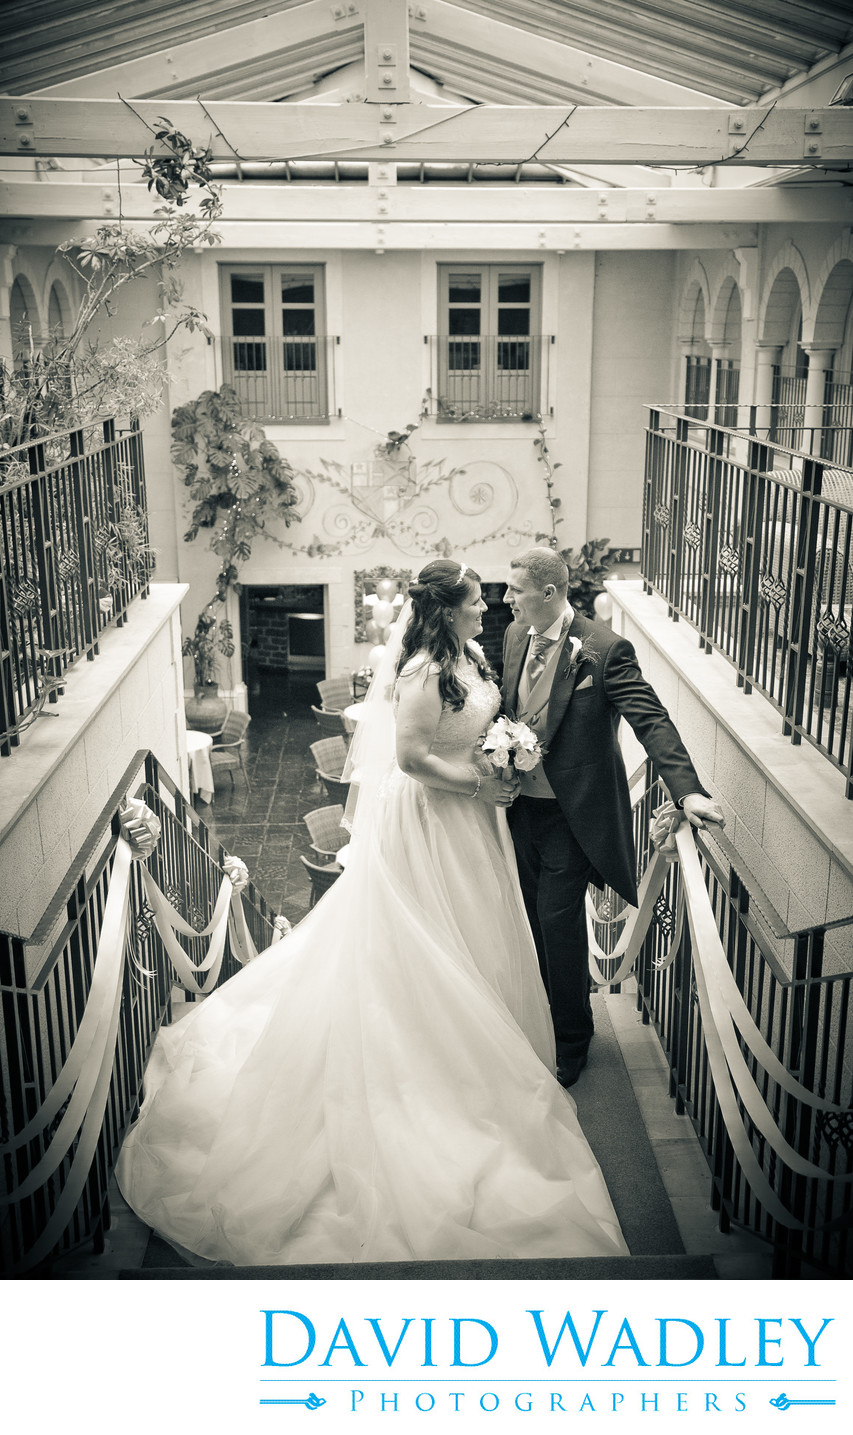 Bride & Groom at the top of the stairs at Nailcote Hall.